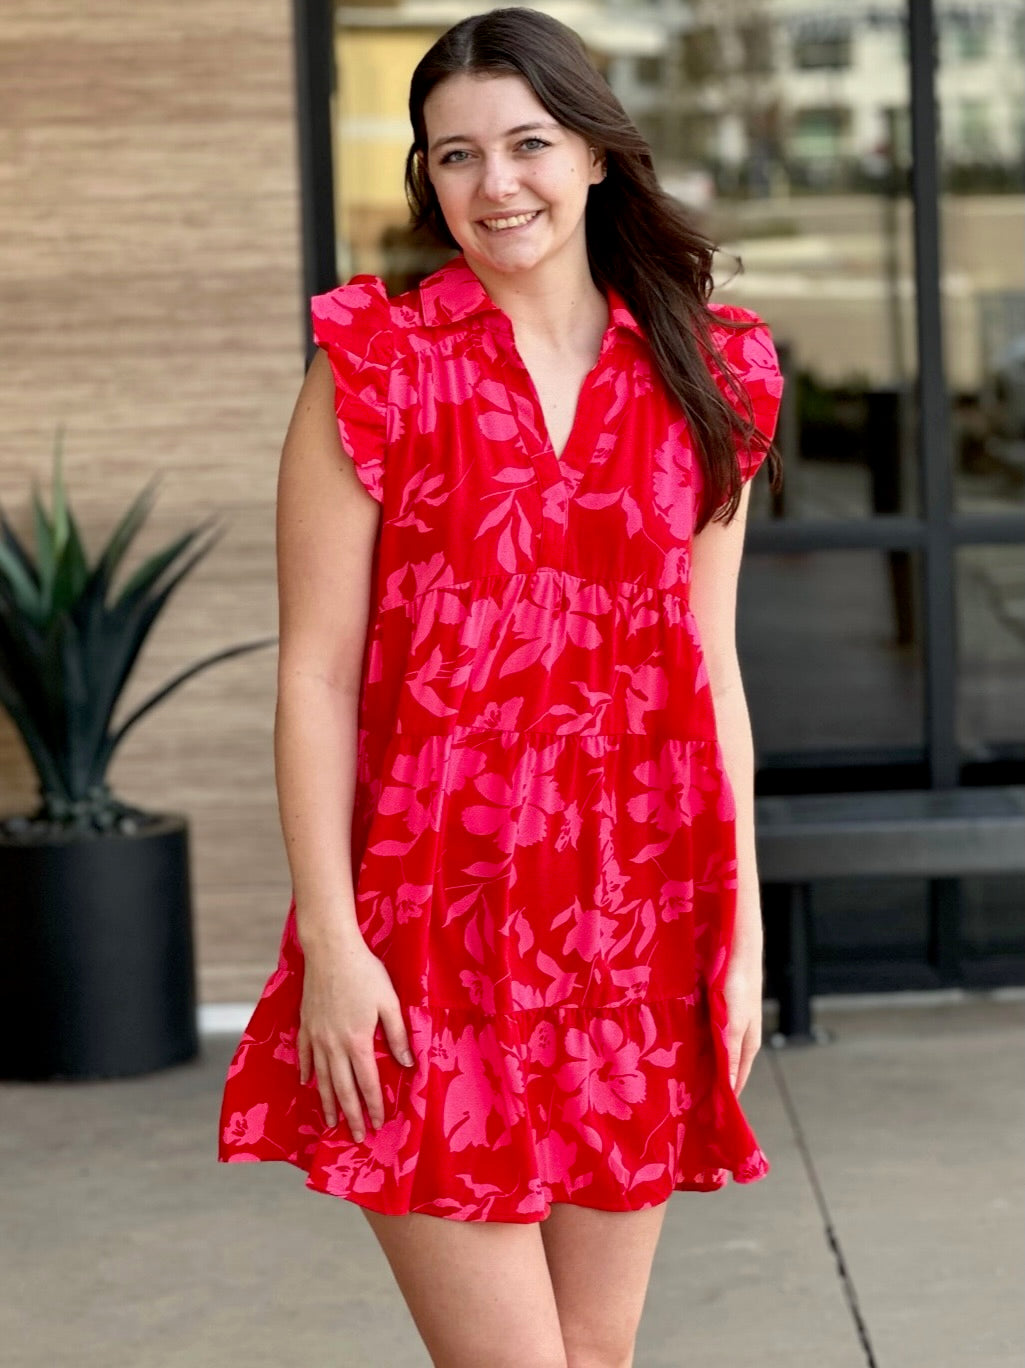 Megan in red mix dress front view smiling hands down